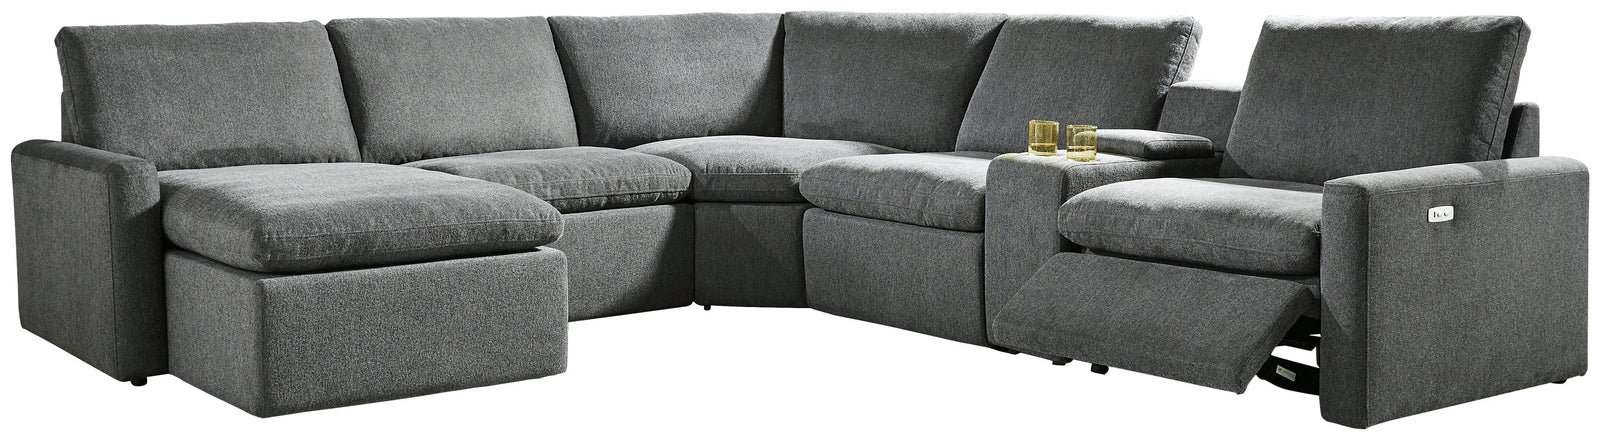 Hartsdale Granite 6-Piece Left Arm Facing Reclining Sectional With Console And Chaise